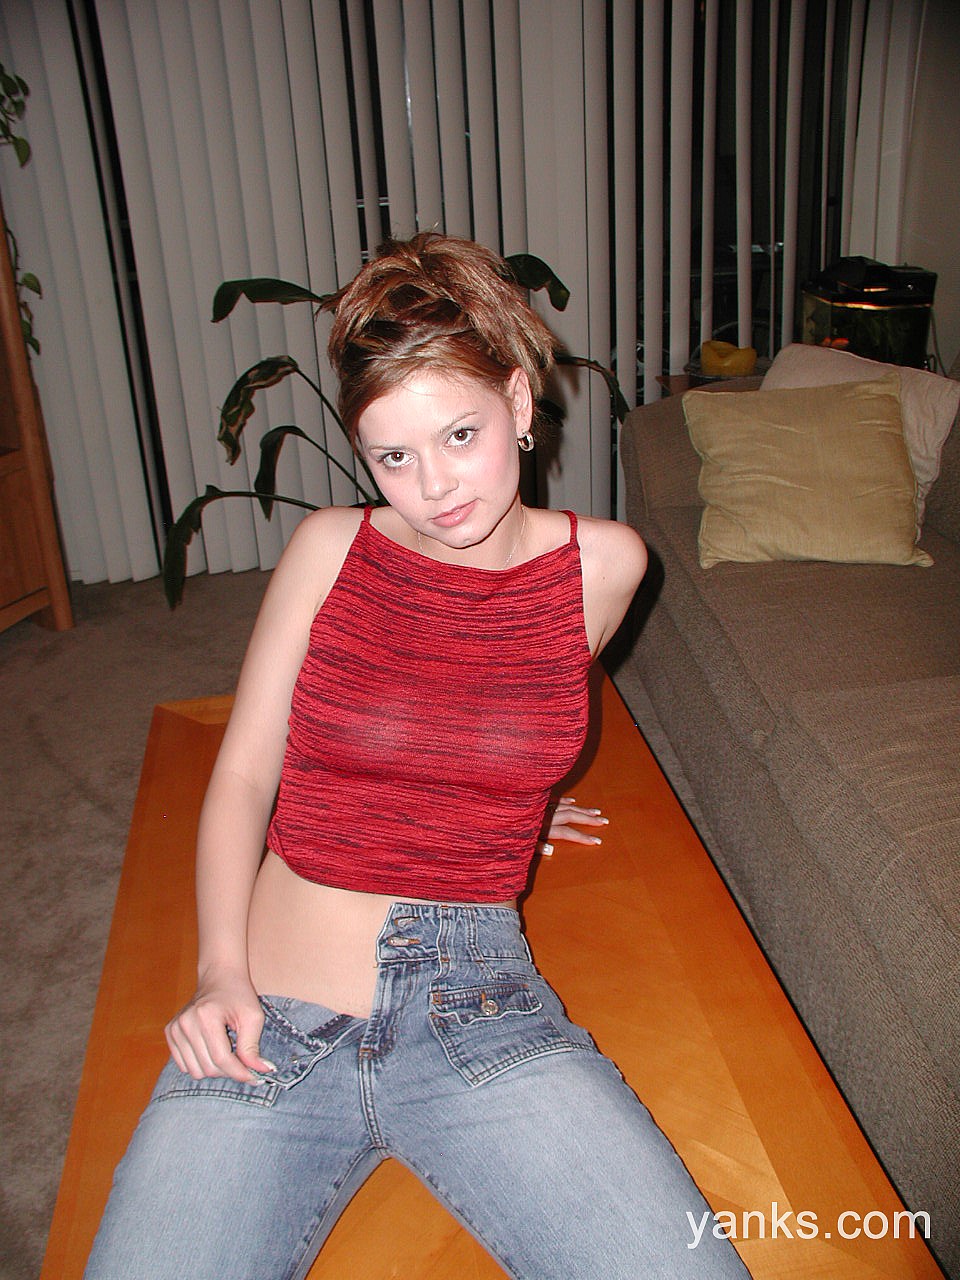 Redhead teen Kelly flaunts sexy feet & sheds jeans to show natural hairy bush photo porno #423309527 | Yanks Pics, Kelly, Amateur, porno mobile